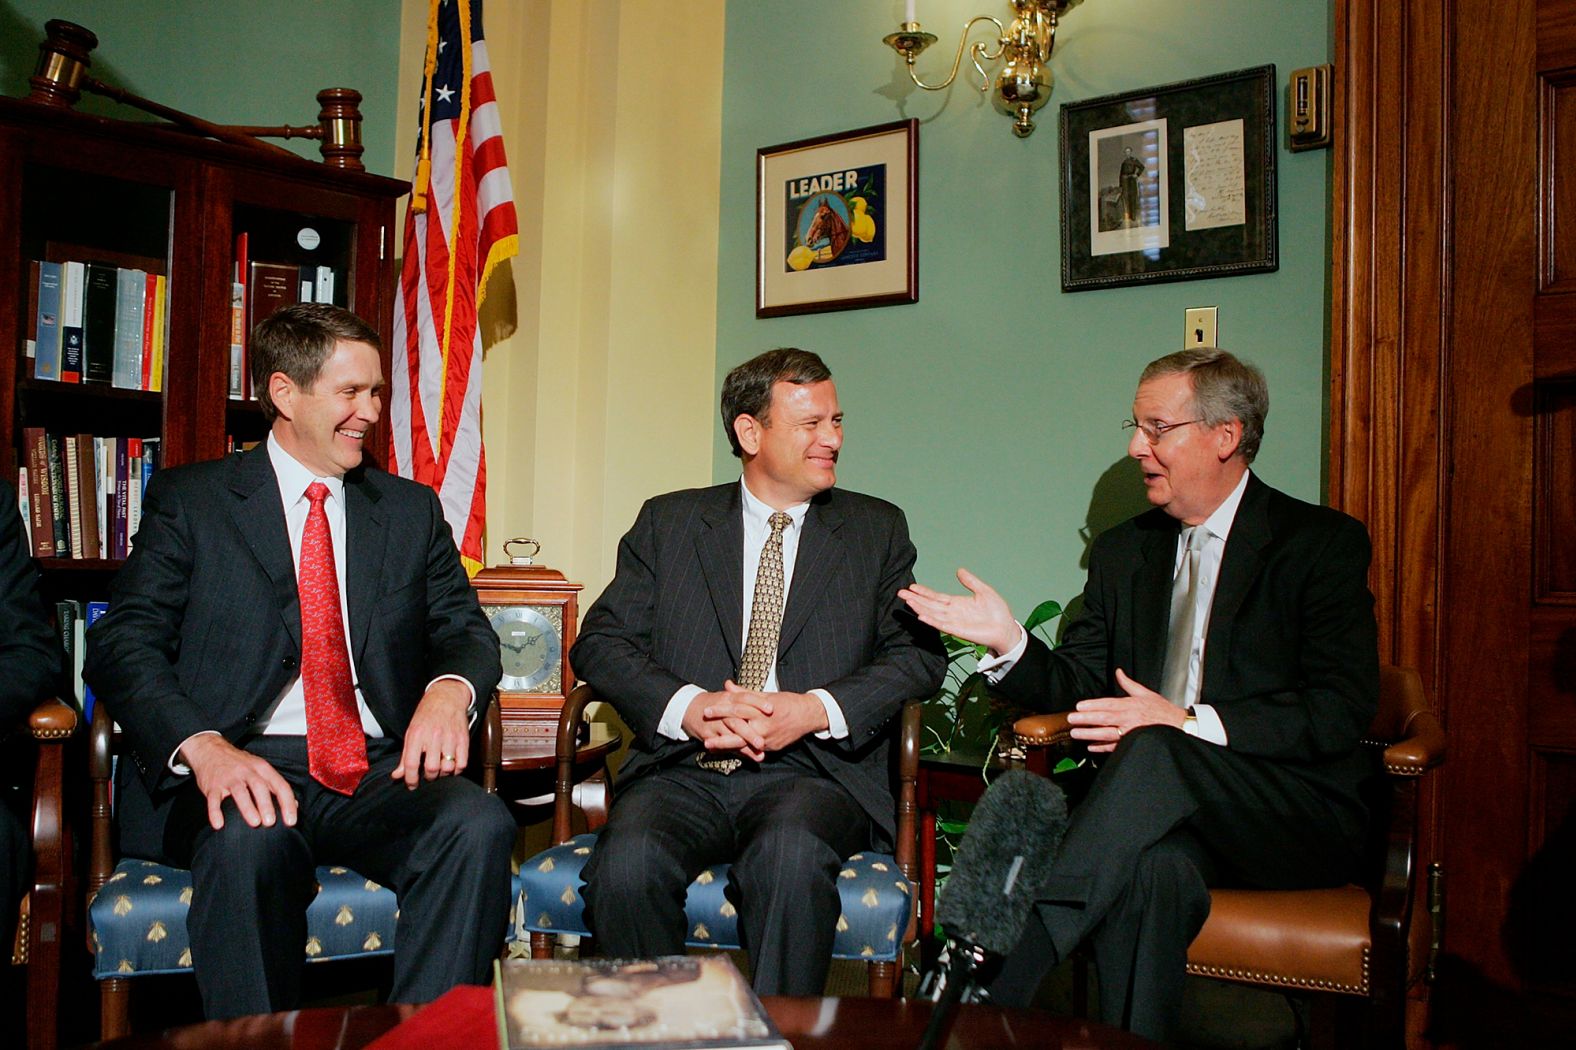 McConnell, right, and Senate Majority Leader Bill Frist, left, meet with Supreme Court nominee John Roberts at the US Capitol in July 2005. McConnell at the time was Senate Republican Whip. He would replace Frist as GOP leader in 2007.